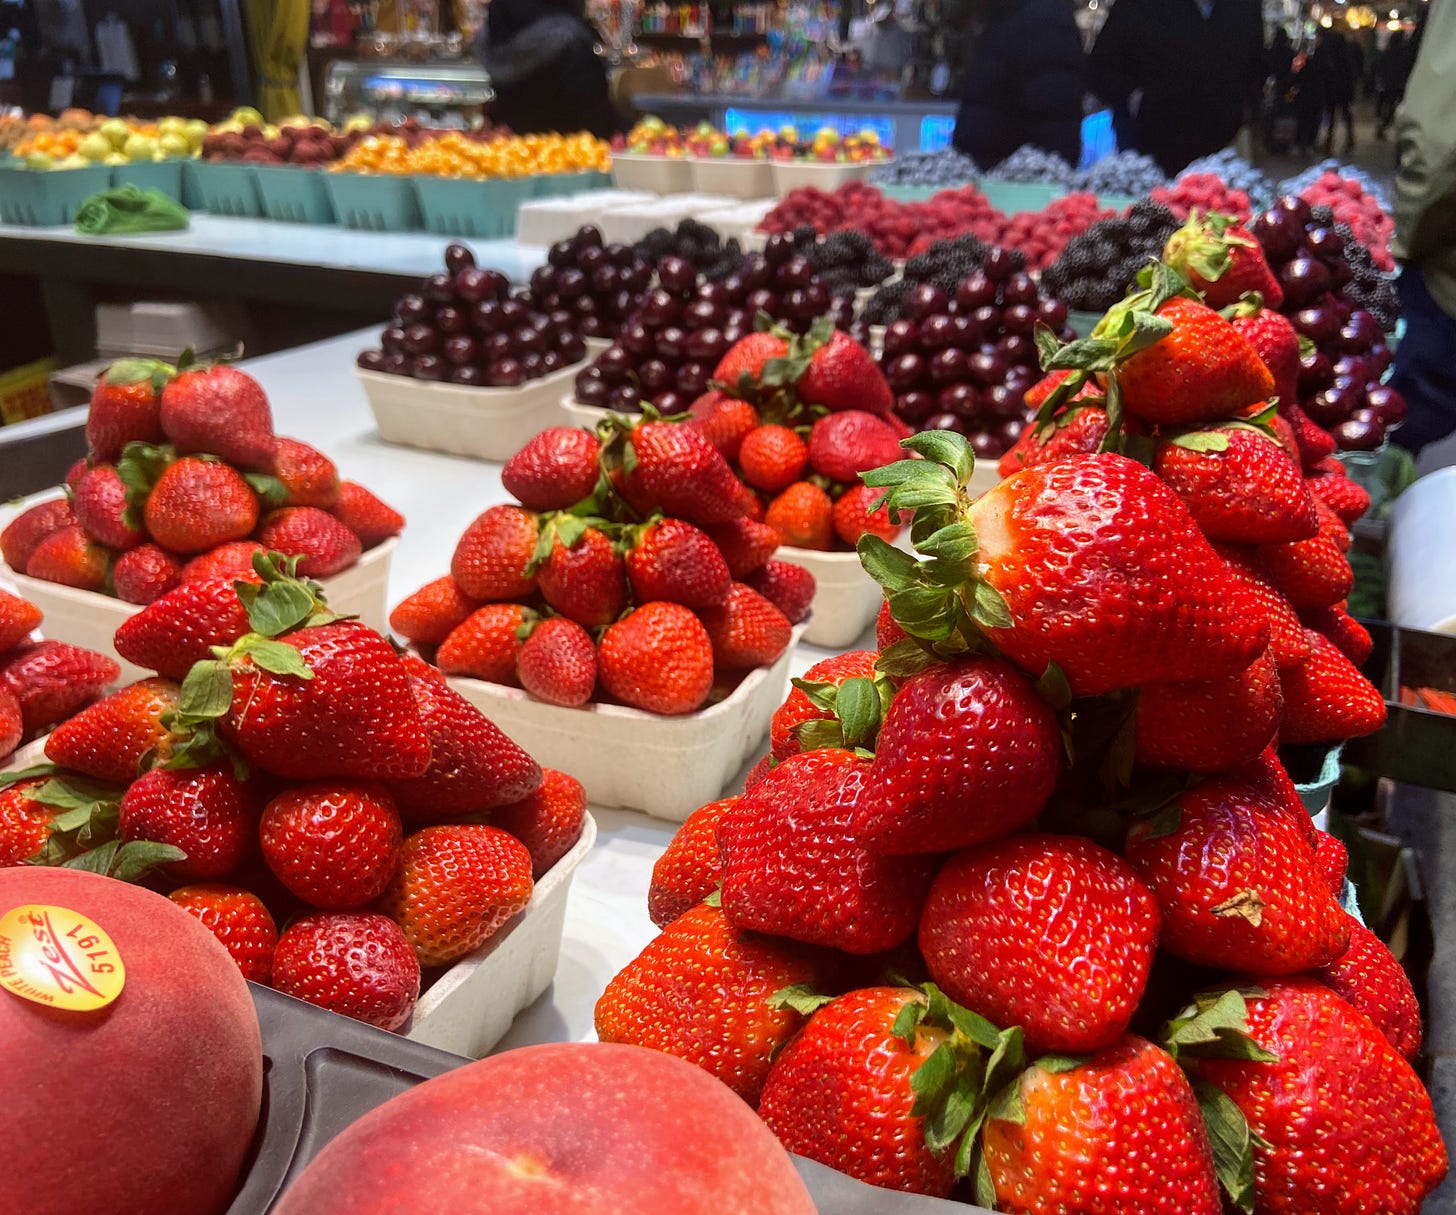 Strawberries, cherries, and other fruit piled in punnets for sale at fruit stand.